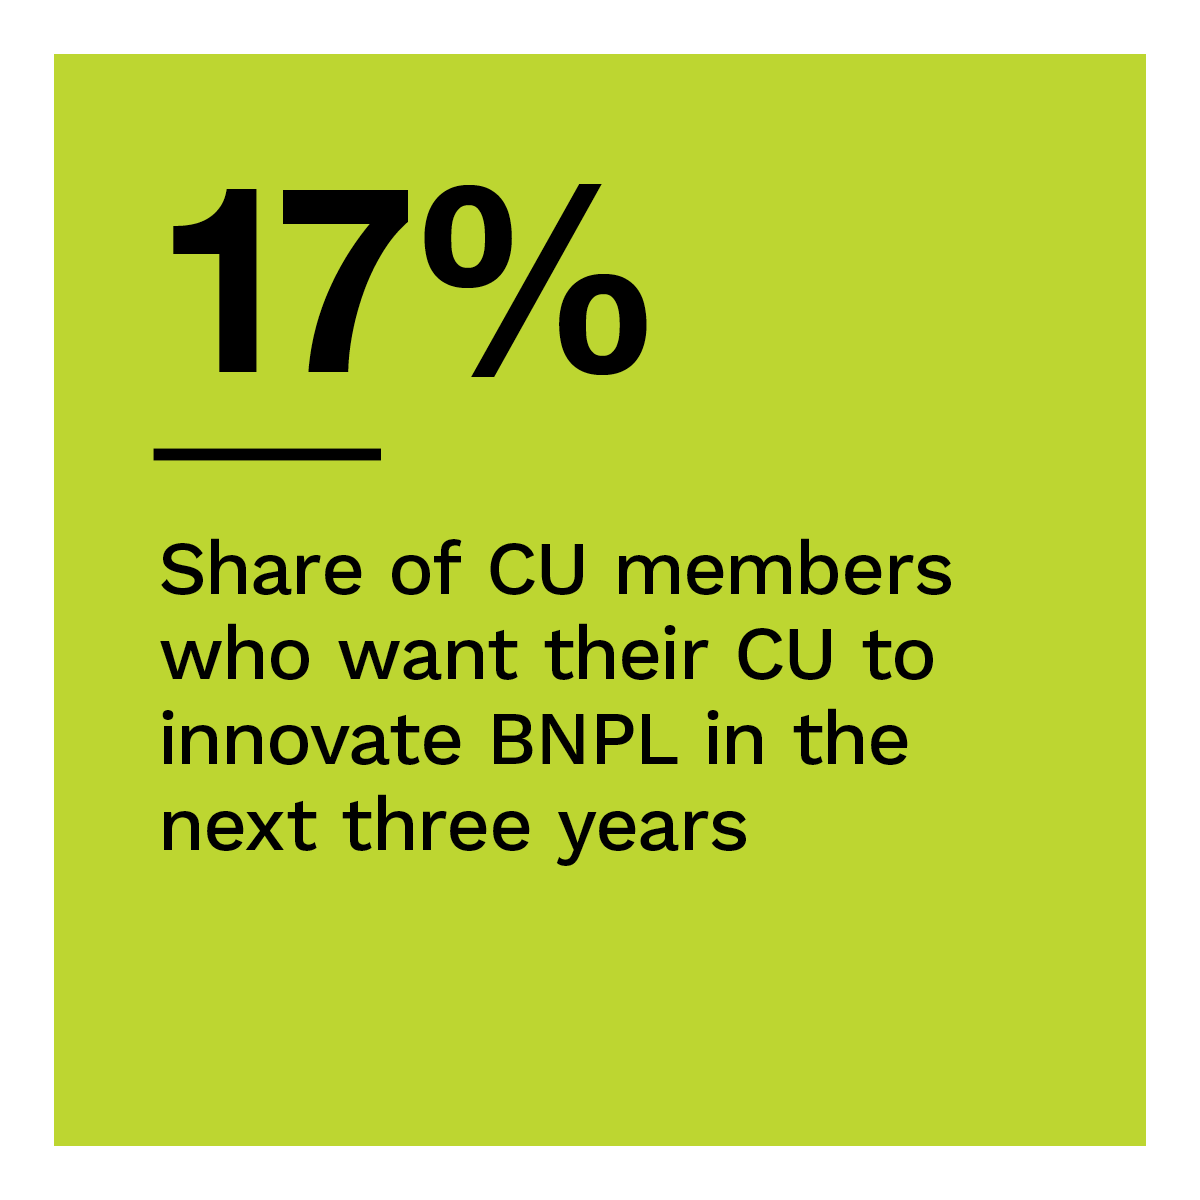  Share of CU members who want their CU to innovate BNPL in the next three years